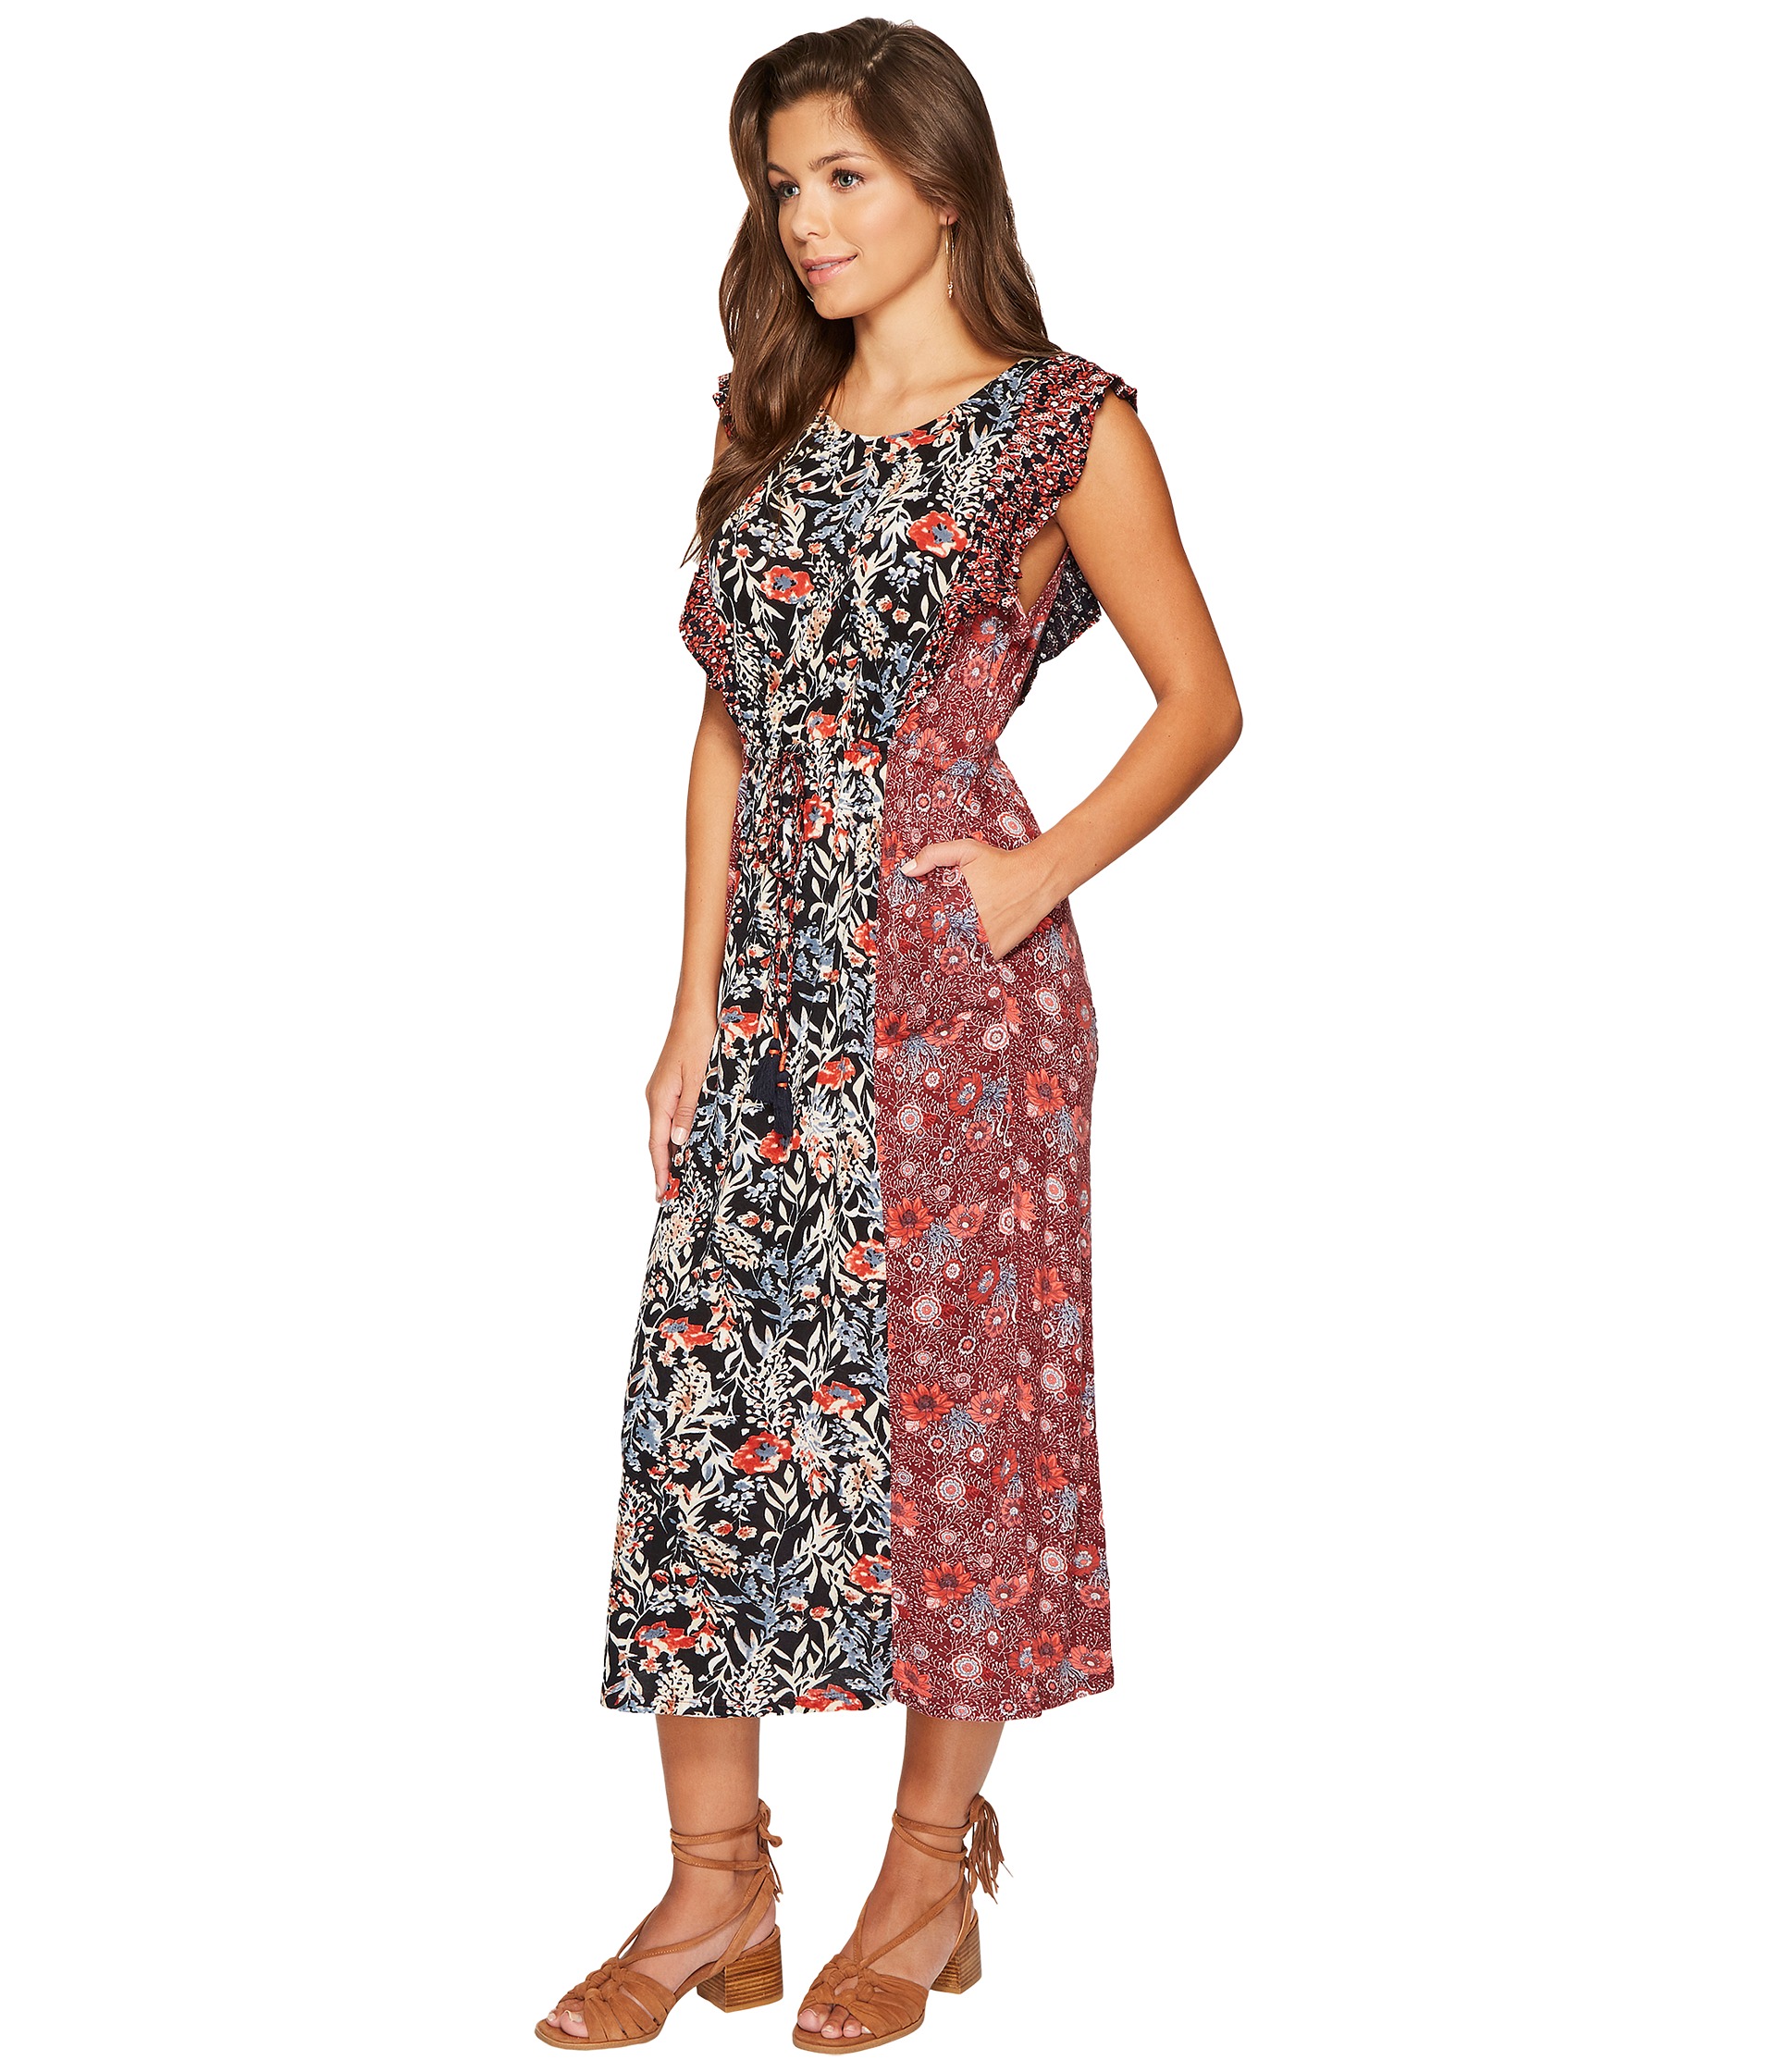 Lucky Brand Mixed Floral Dress at Zappos.com